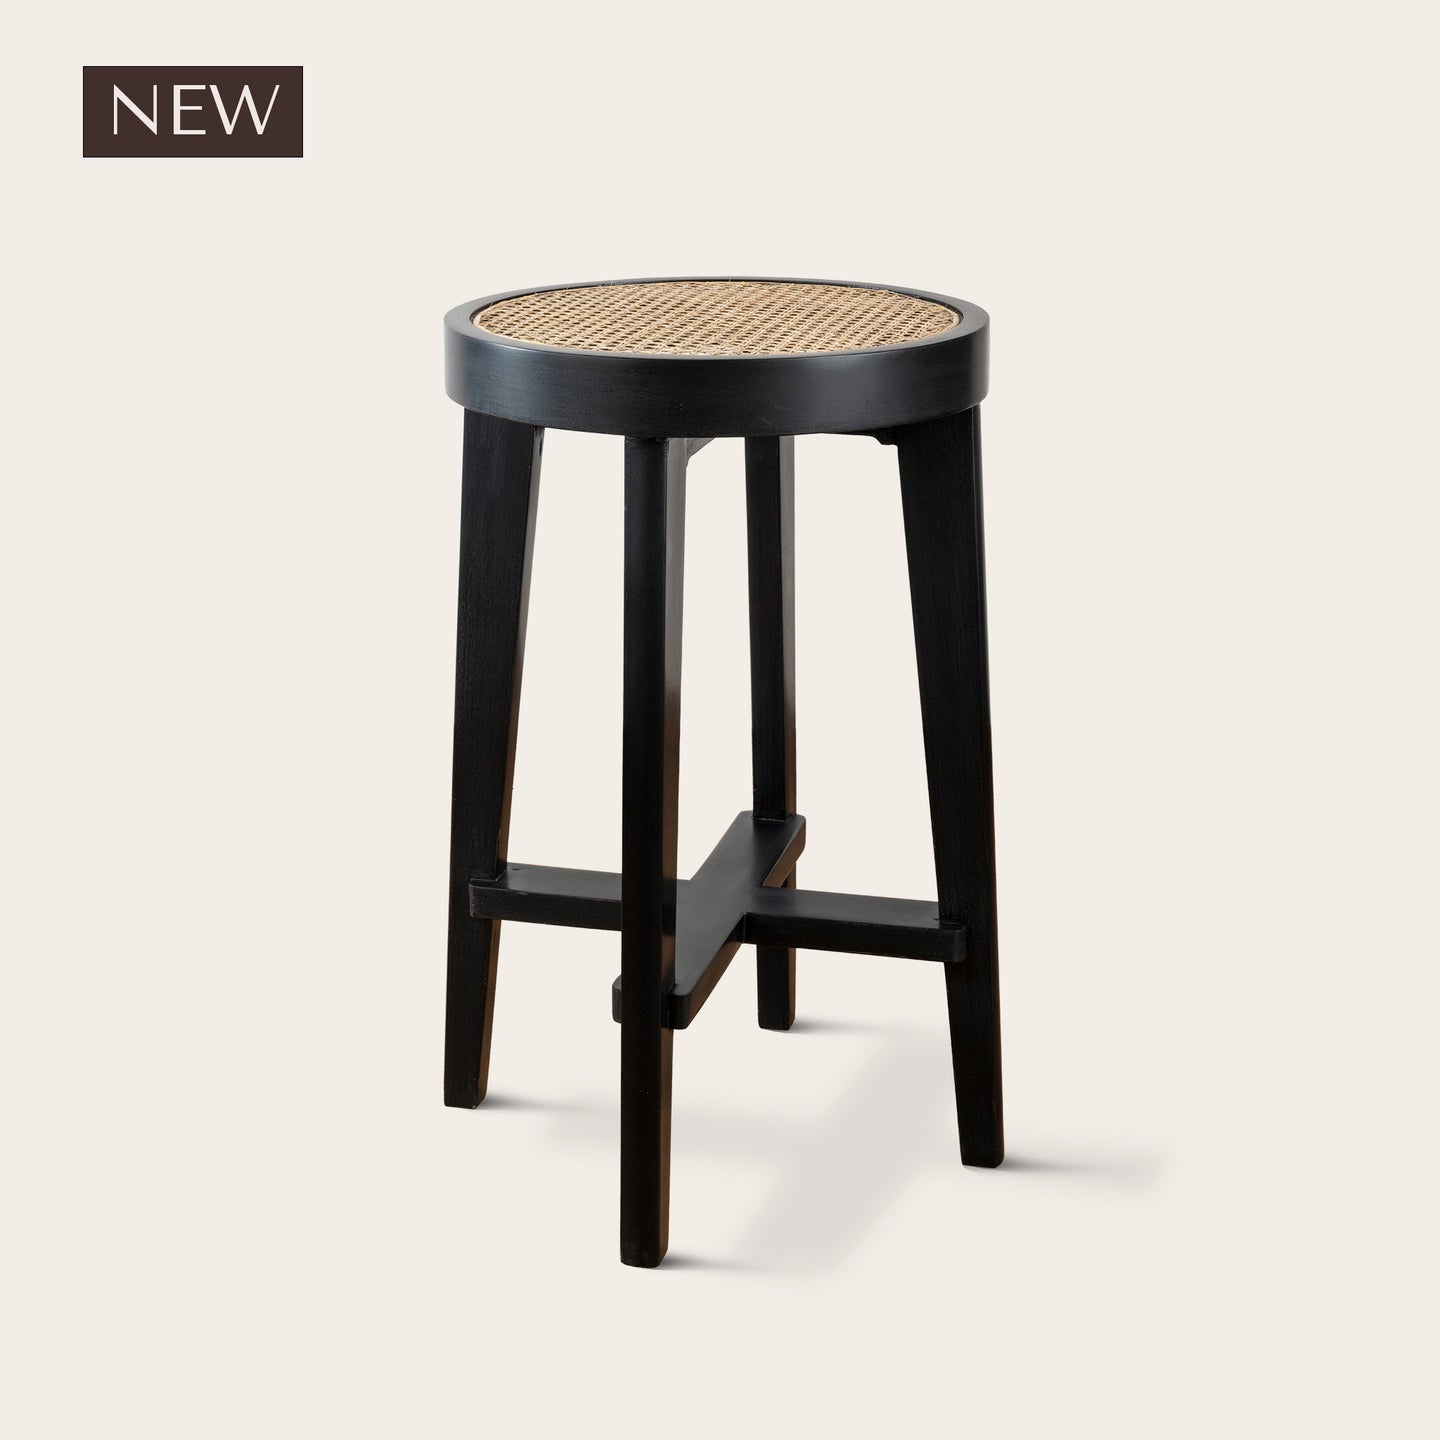 Pierre Jeanneret High Stool - Charcoal